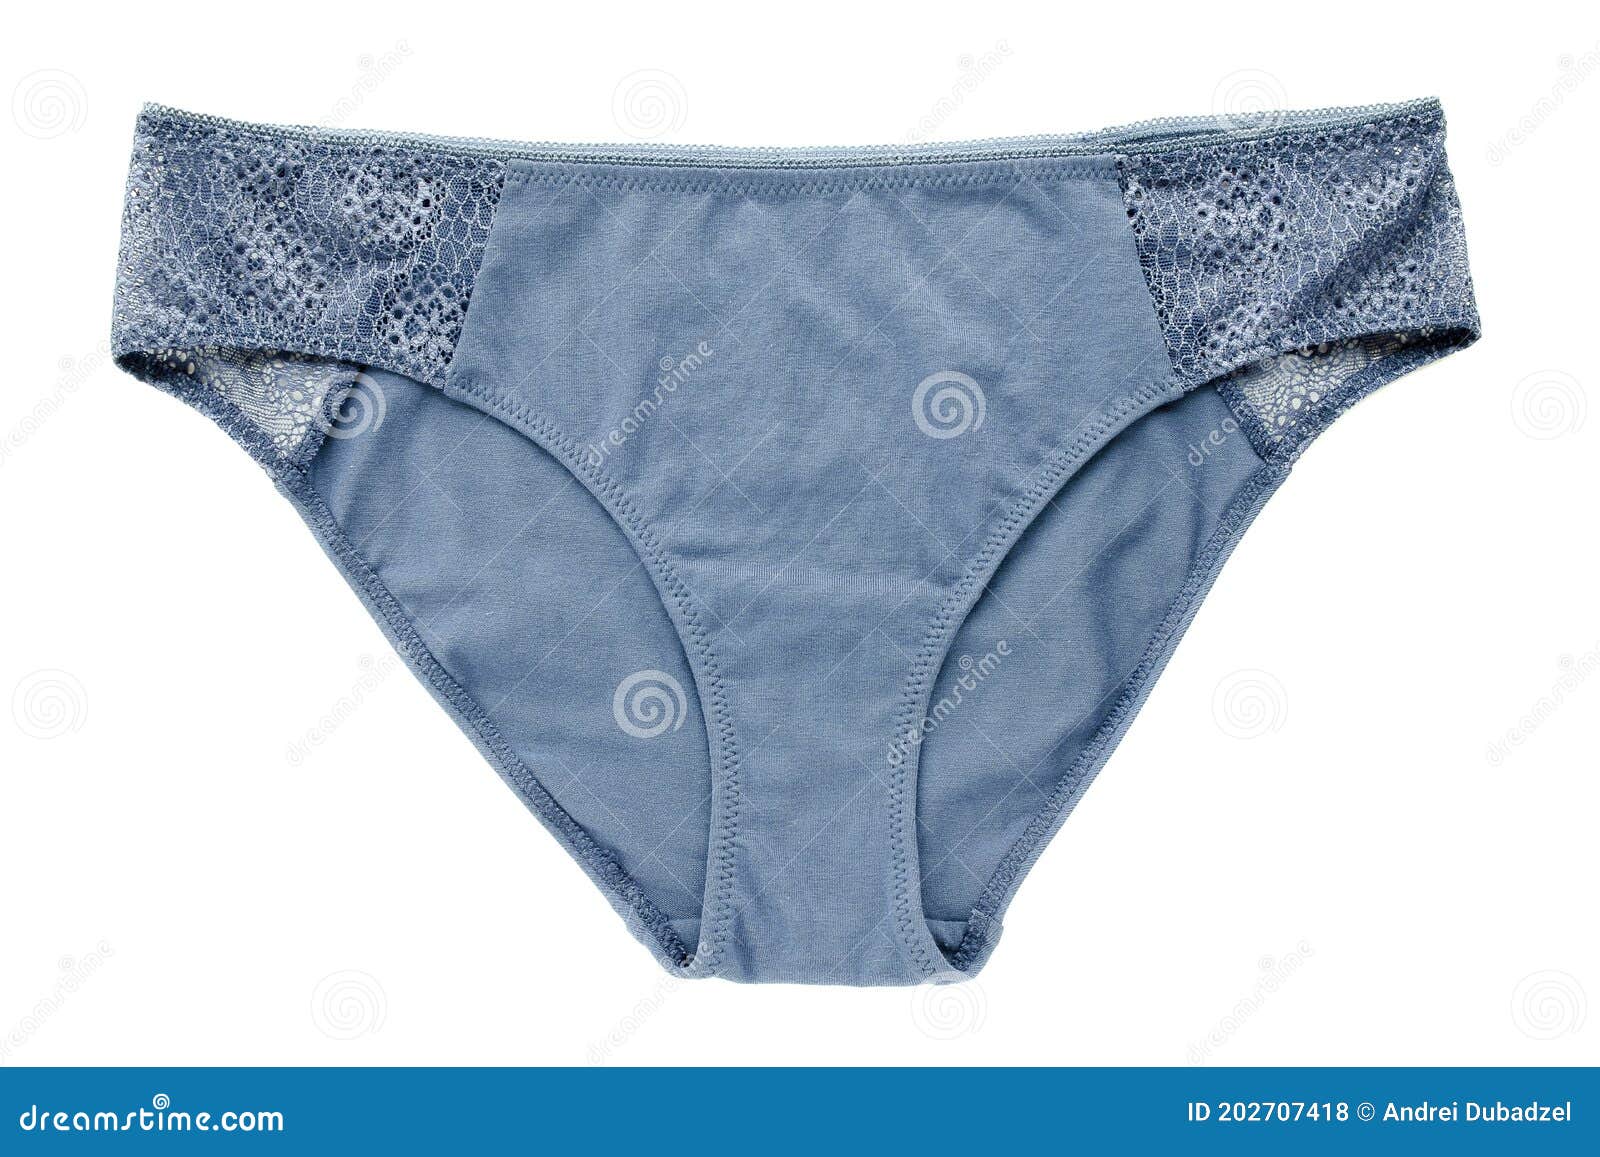 Premium Photo  Bright womens panties on a bright blue background